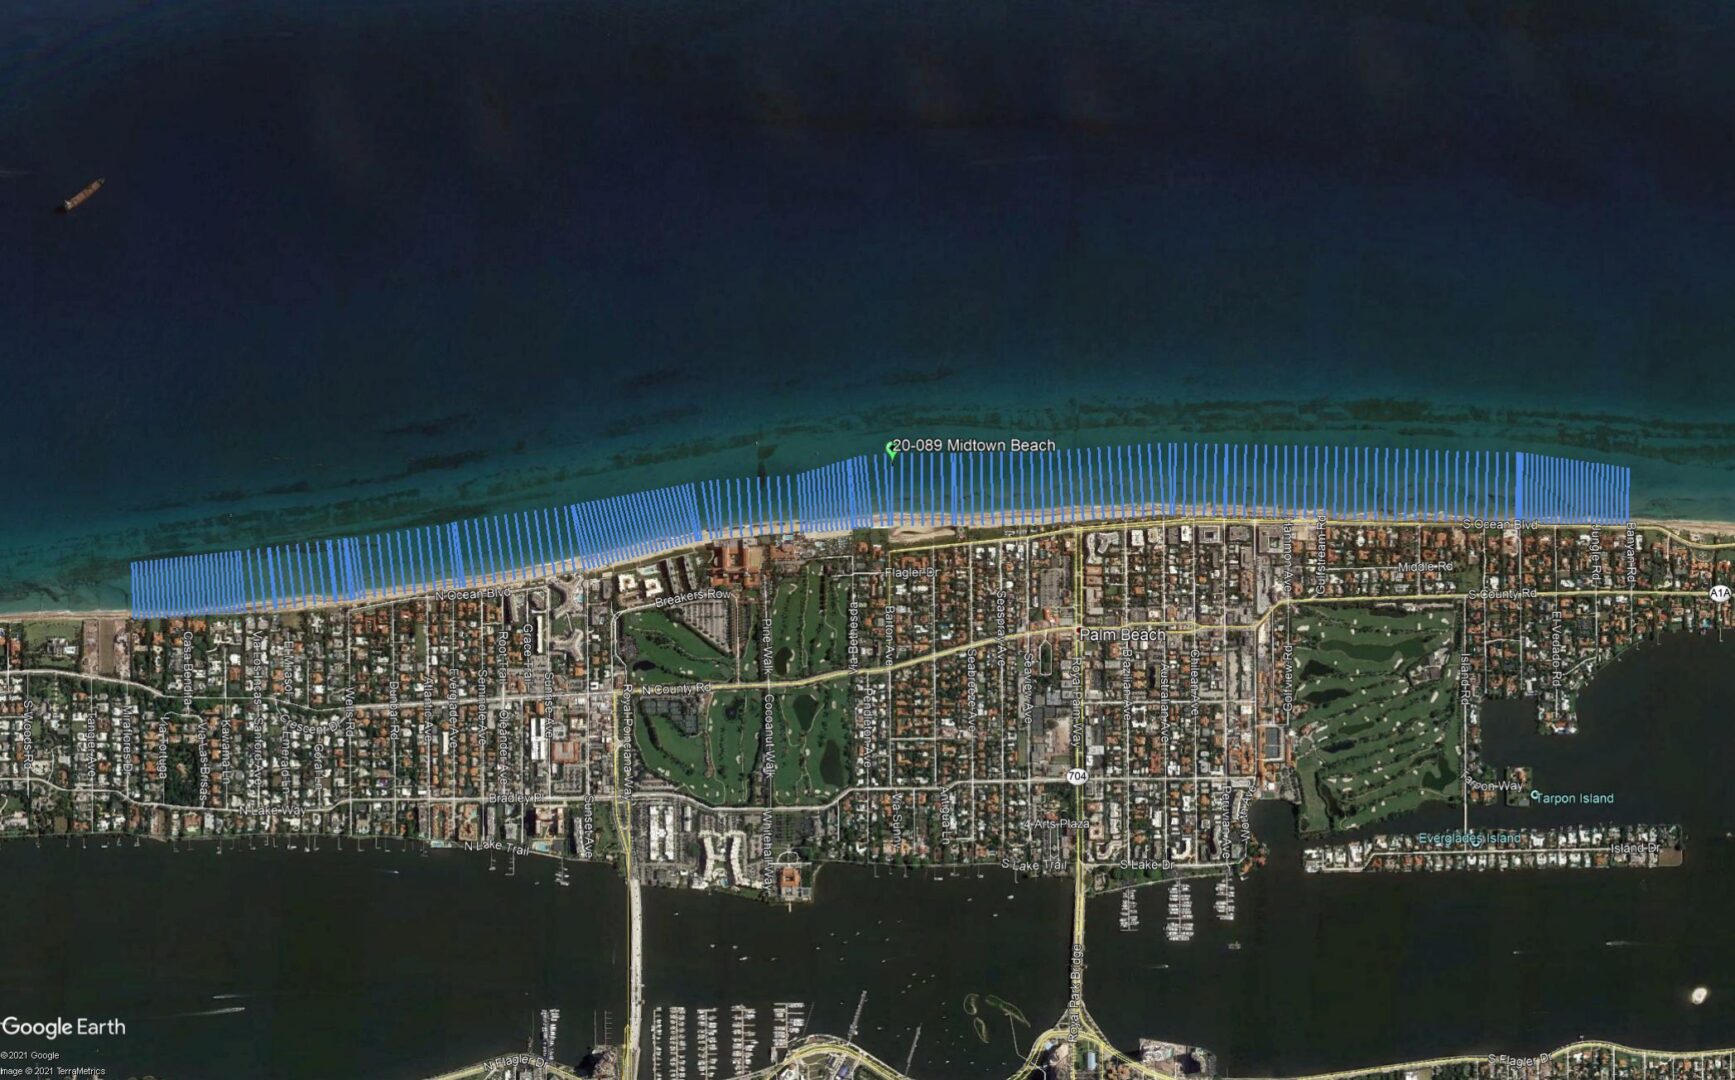 A satellite image of the city and beach.